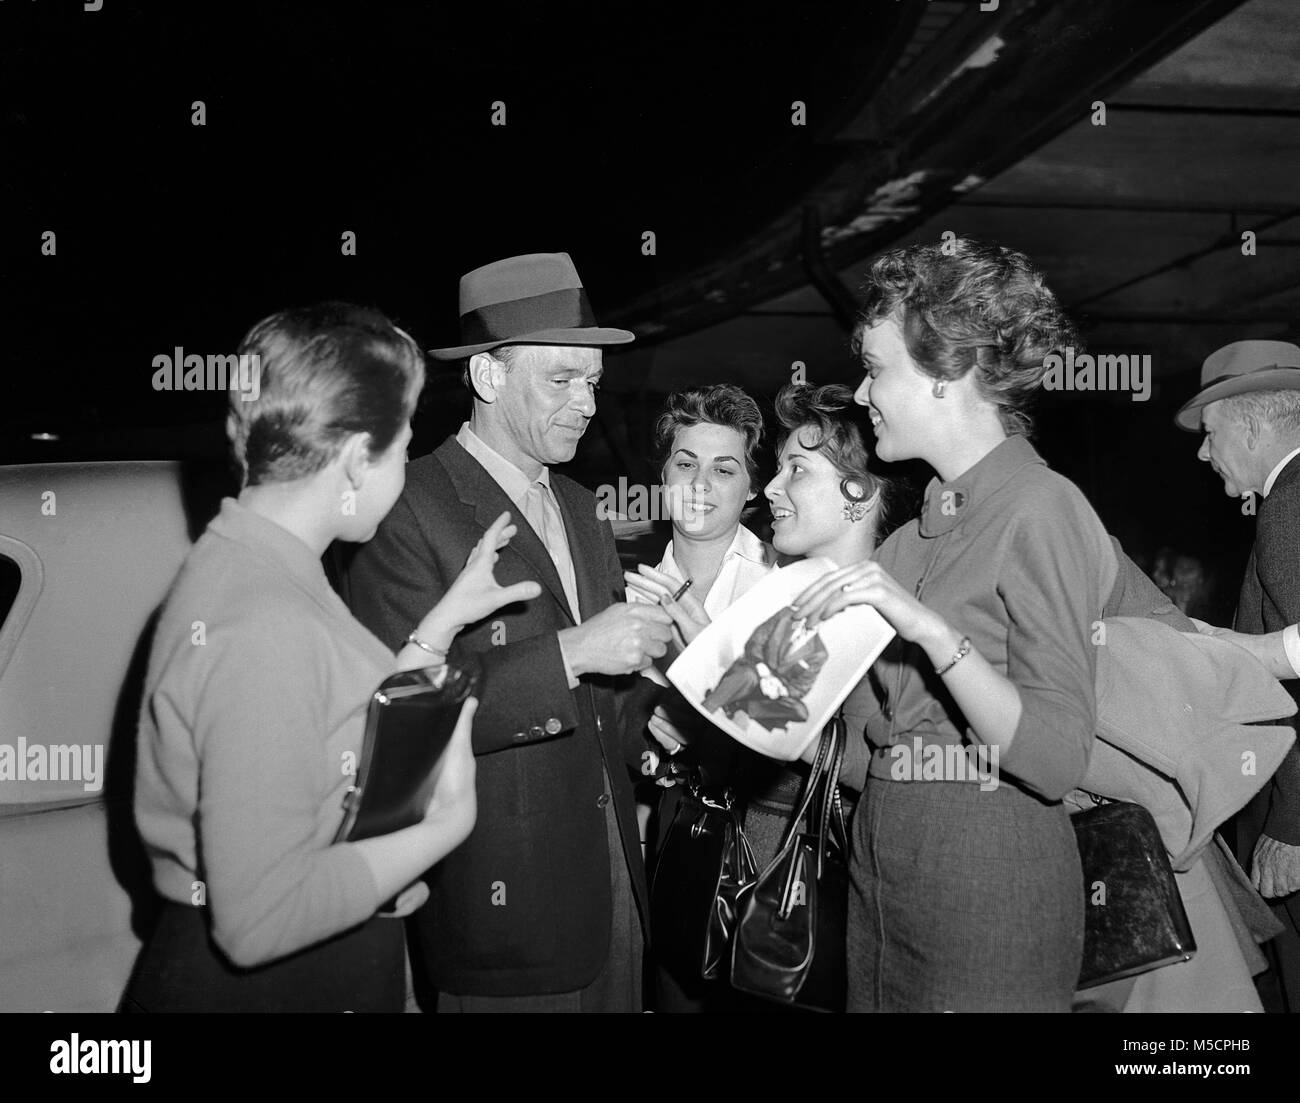 Frank Sinatra, singer & actor arriving in Chicago at the Illinois Central Depot on City of Miami train, March 29, 1960. Image from original camera negative. Stock Photo